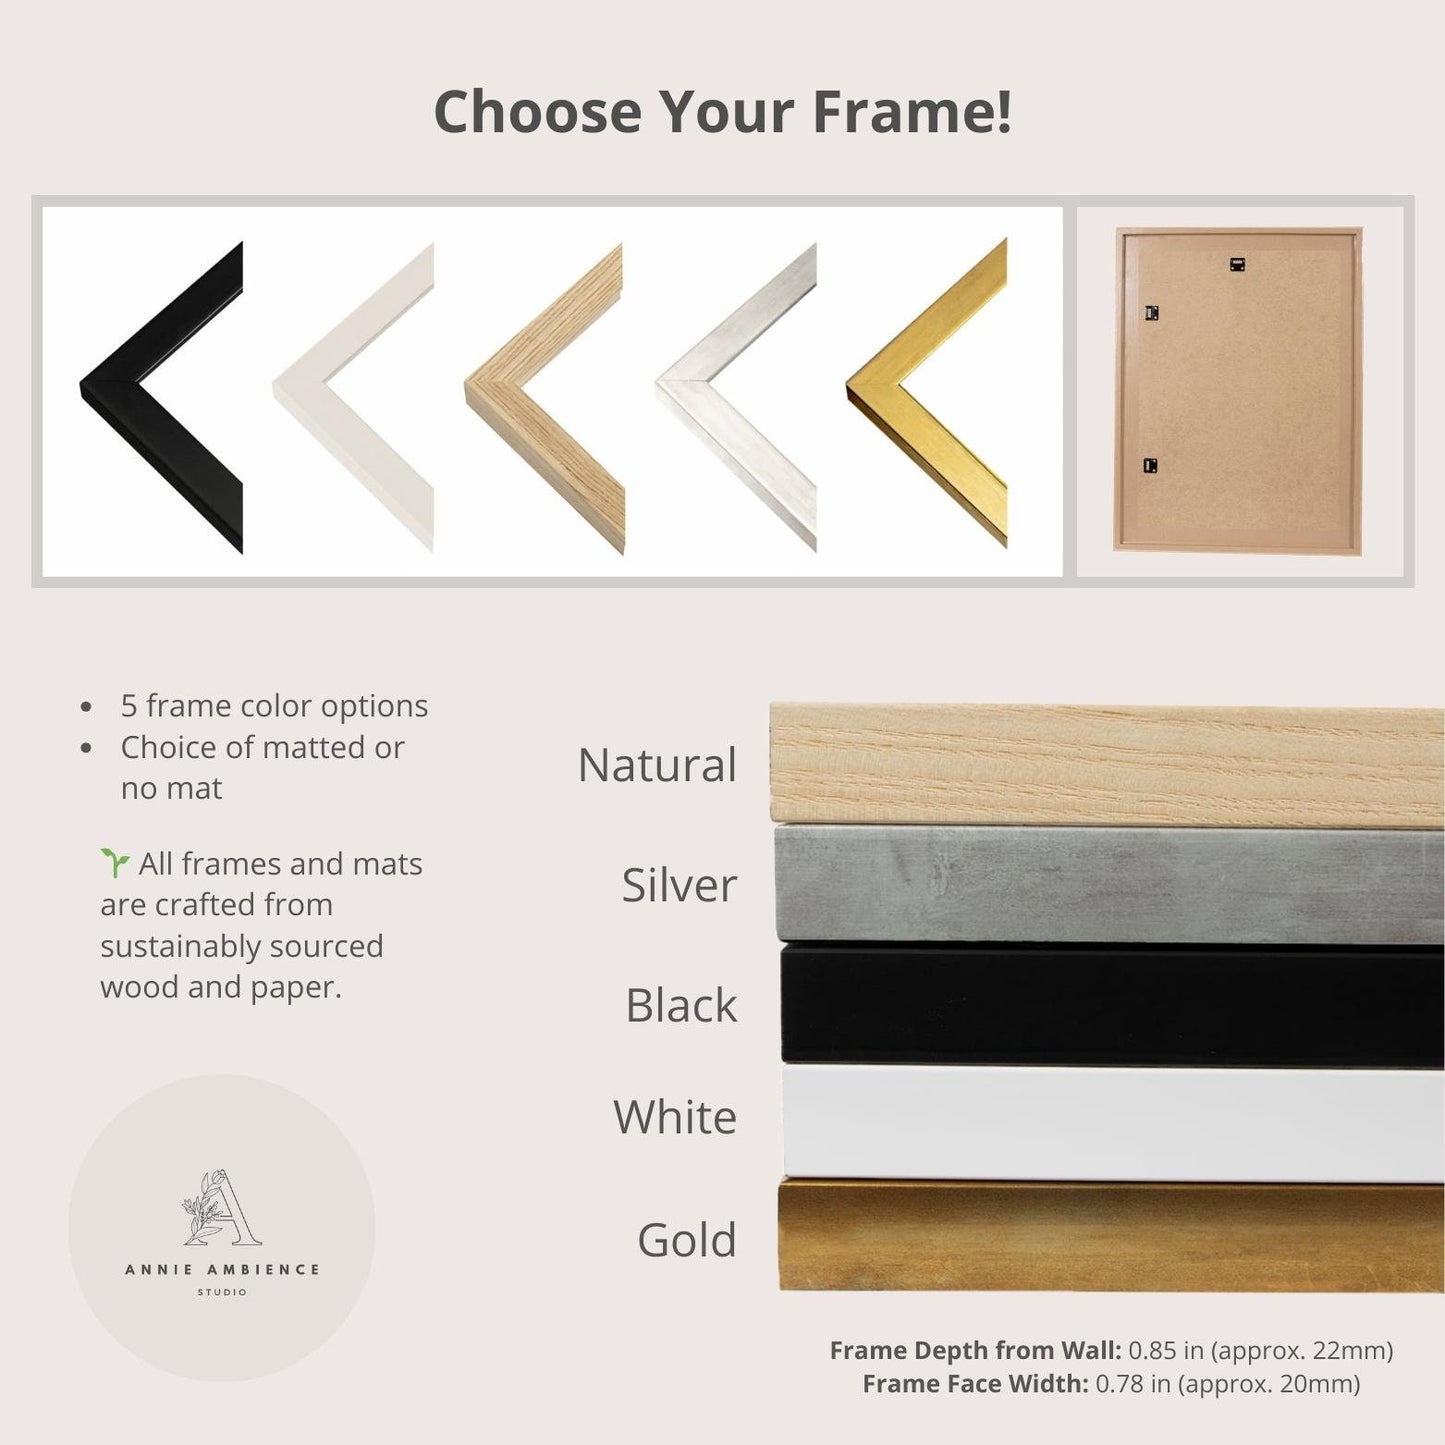 Choose your frame from 4 colors: Black, white, natural, silver, and gold.